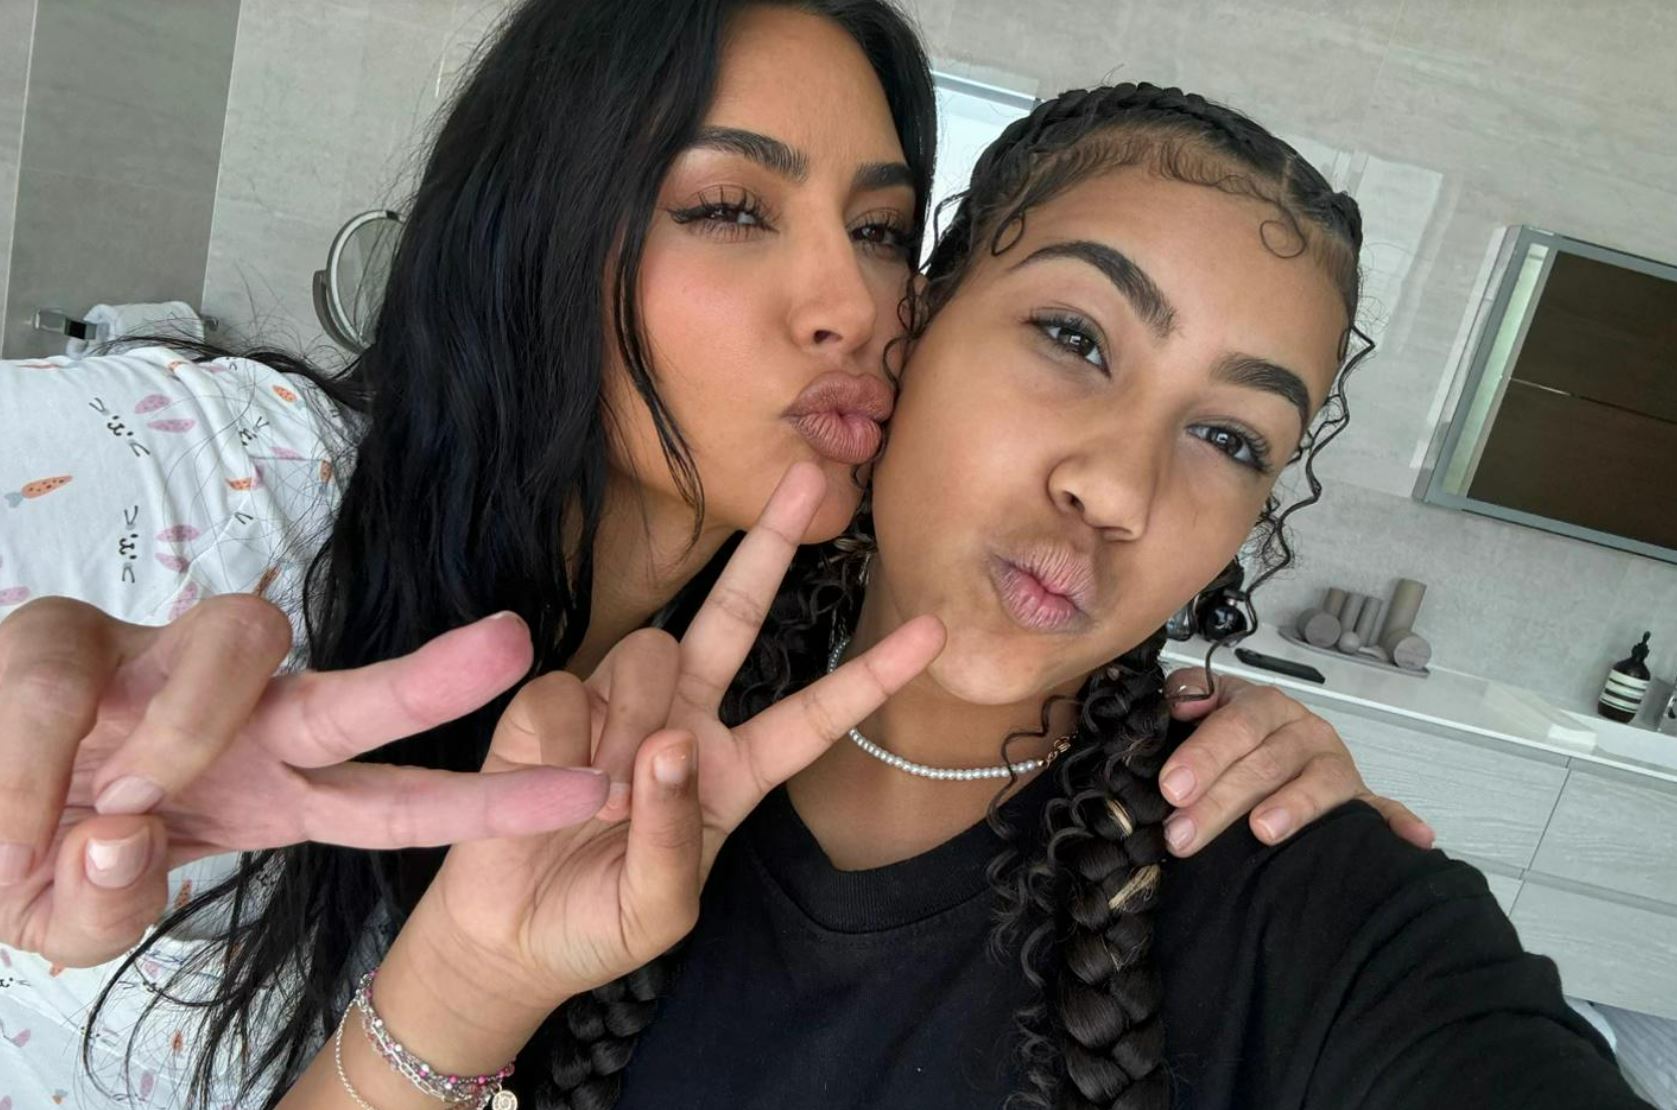 North recently mocked her mother on the platform by imitating her pose in another photo